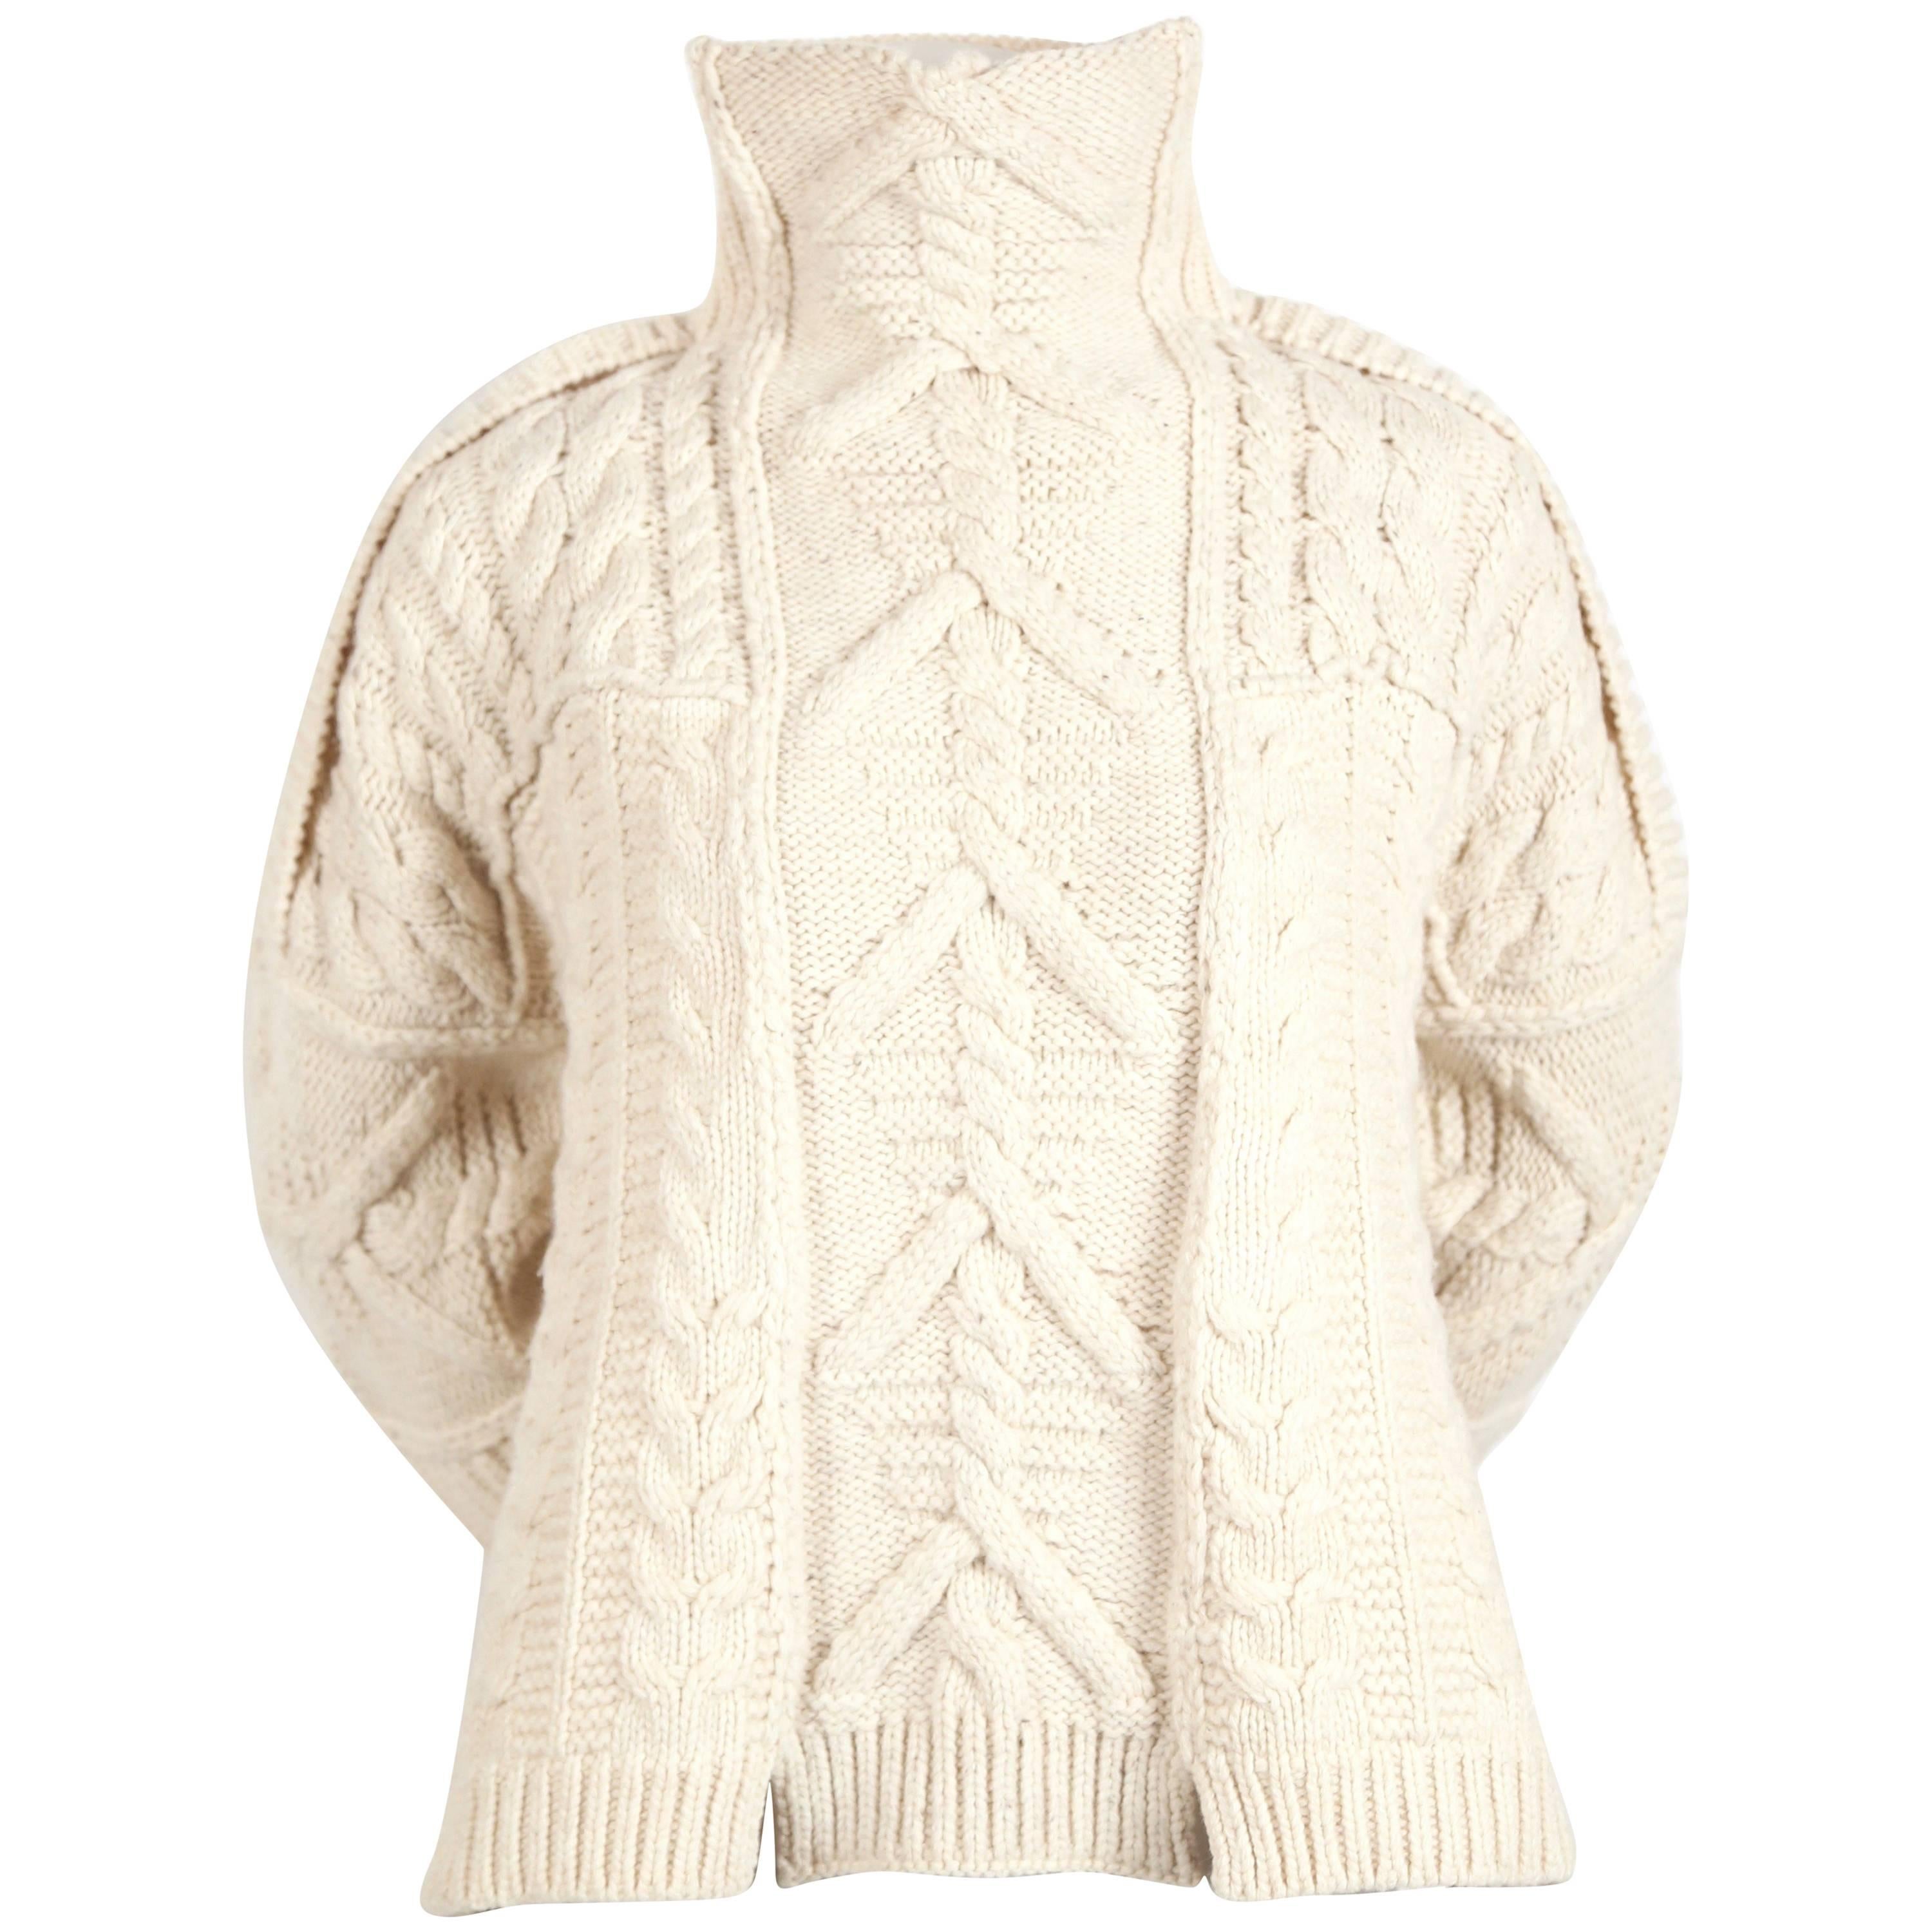 Celine by Phoebe Philo cream cable knit wool sweater